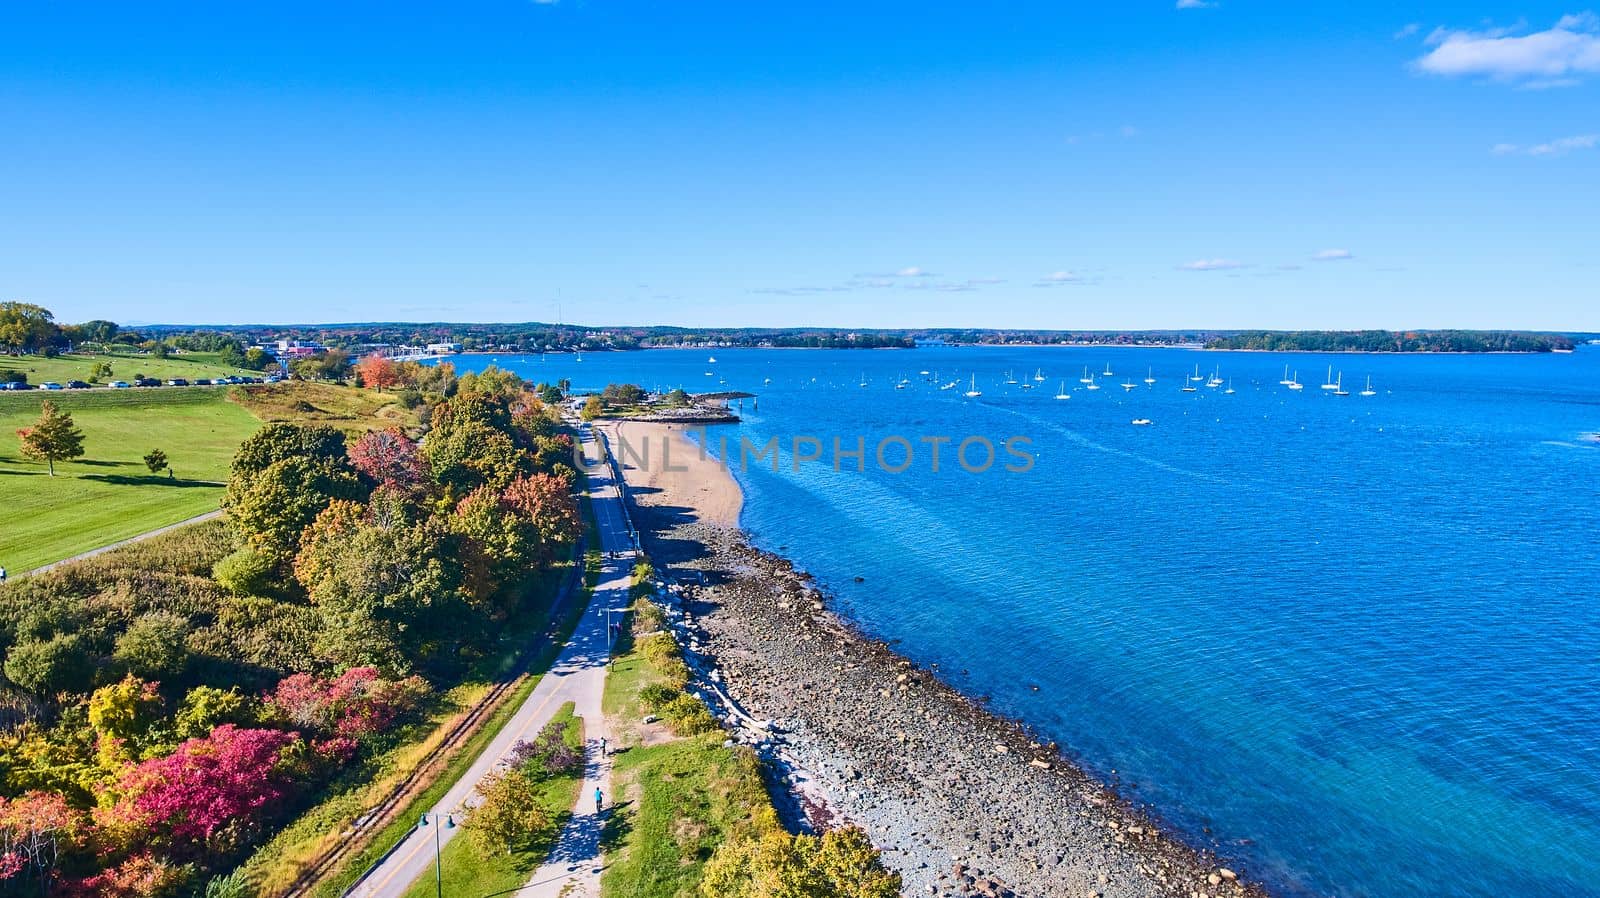 Image of Maine coastline with ocean views, boats, and forest trails